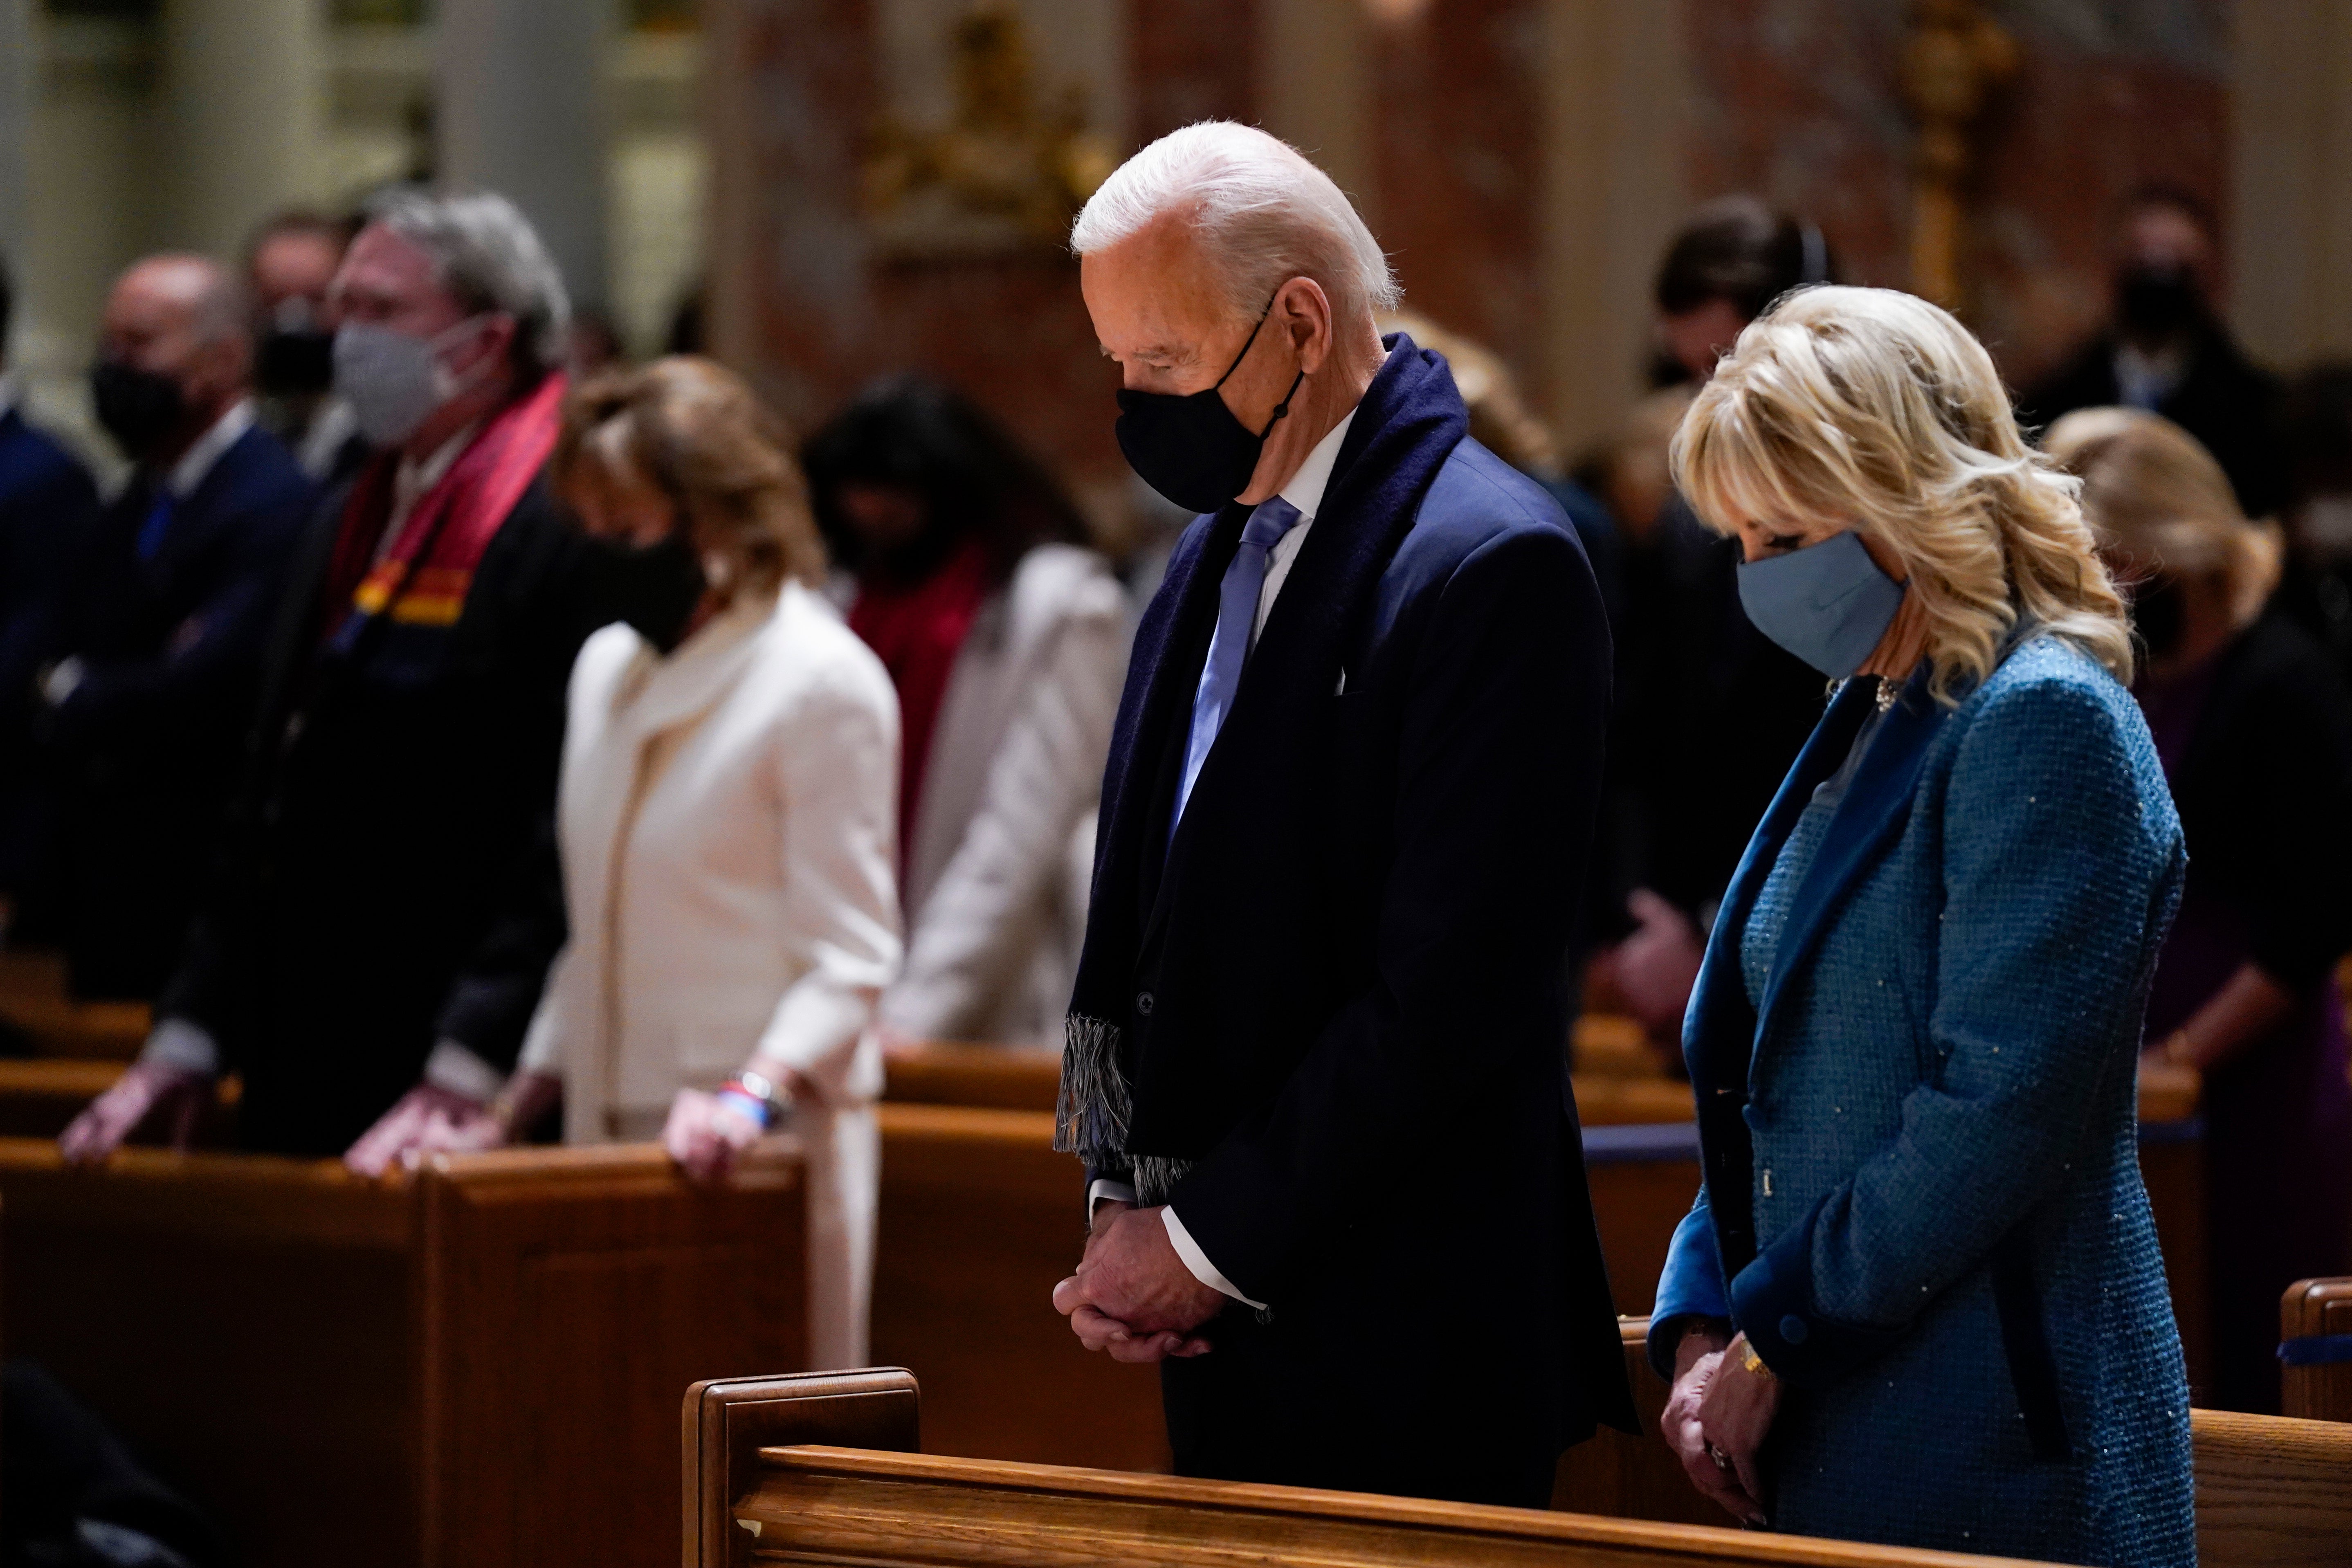 Members of Biden’s party have defended his right to take Communion following of US Catholic bishops attempts to disallow him.